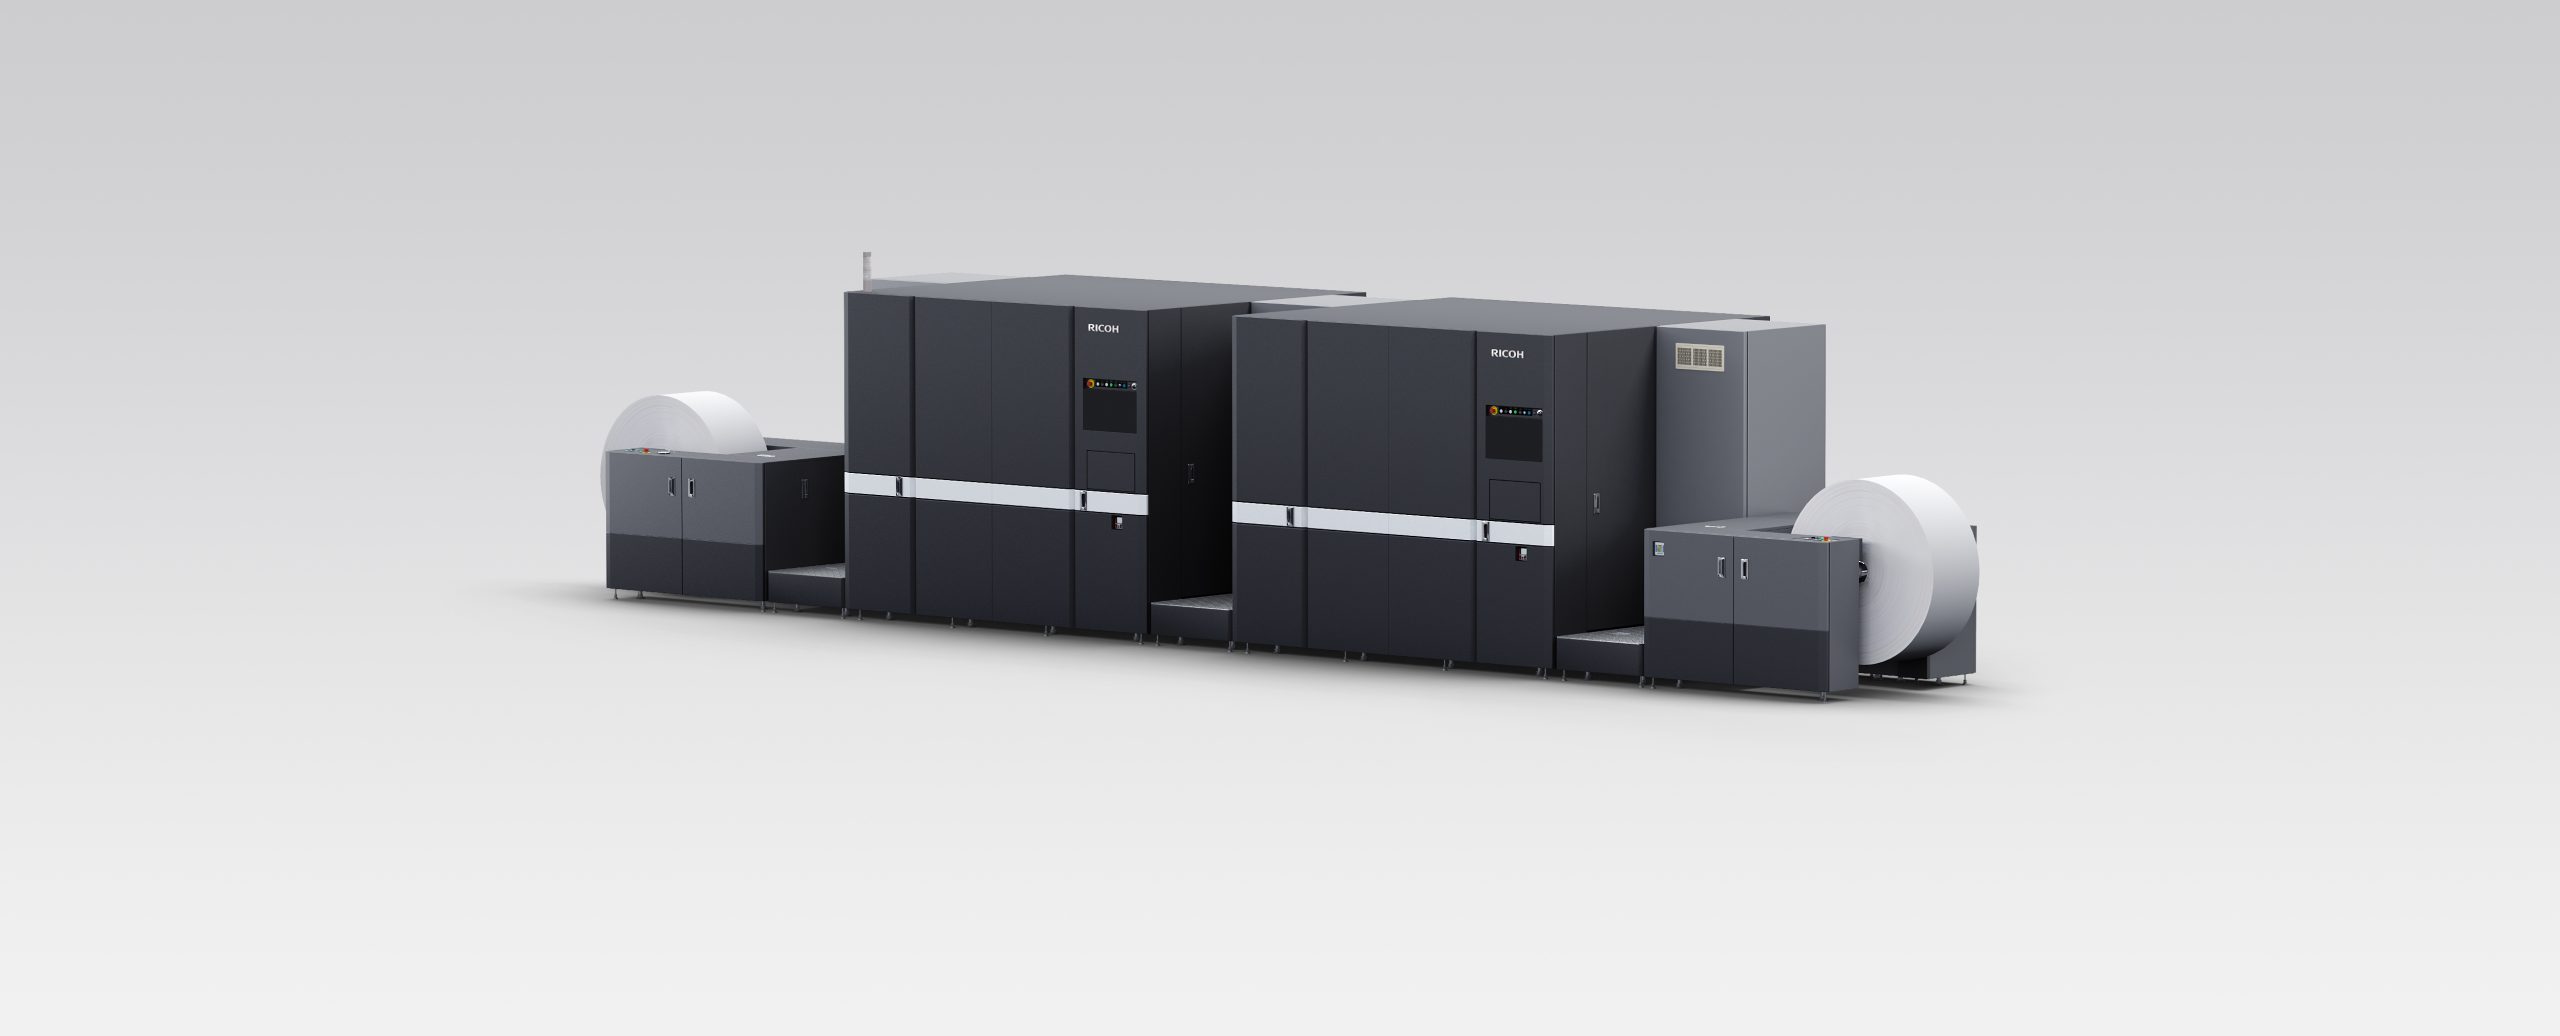 The RICOH Pro VC80000 rewrites inkjet economics with a number of groundbreaking technologies, black printer on grey background